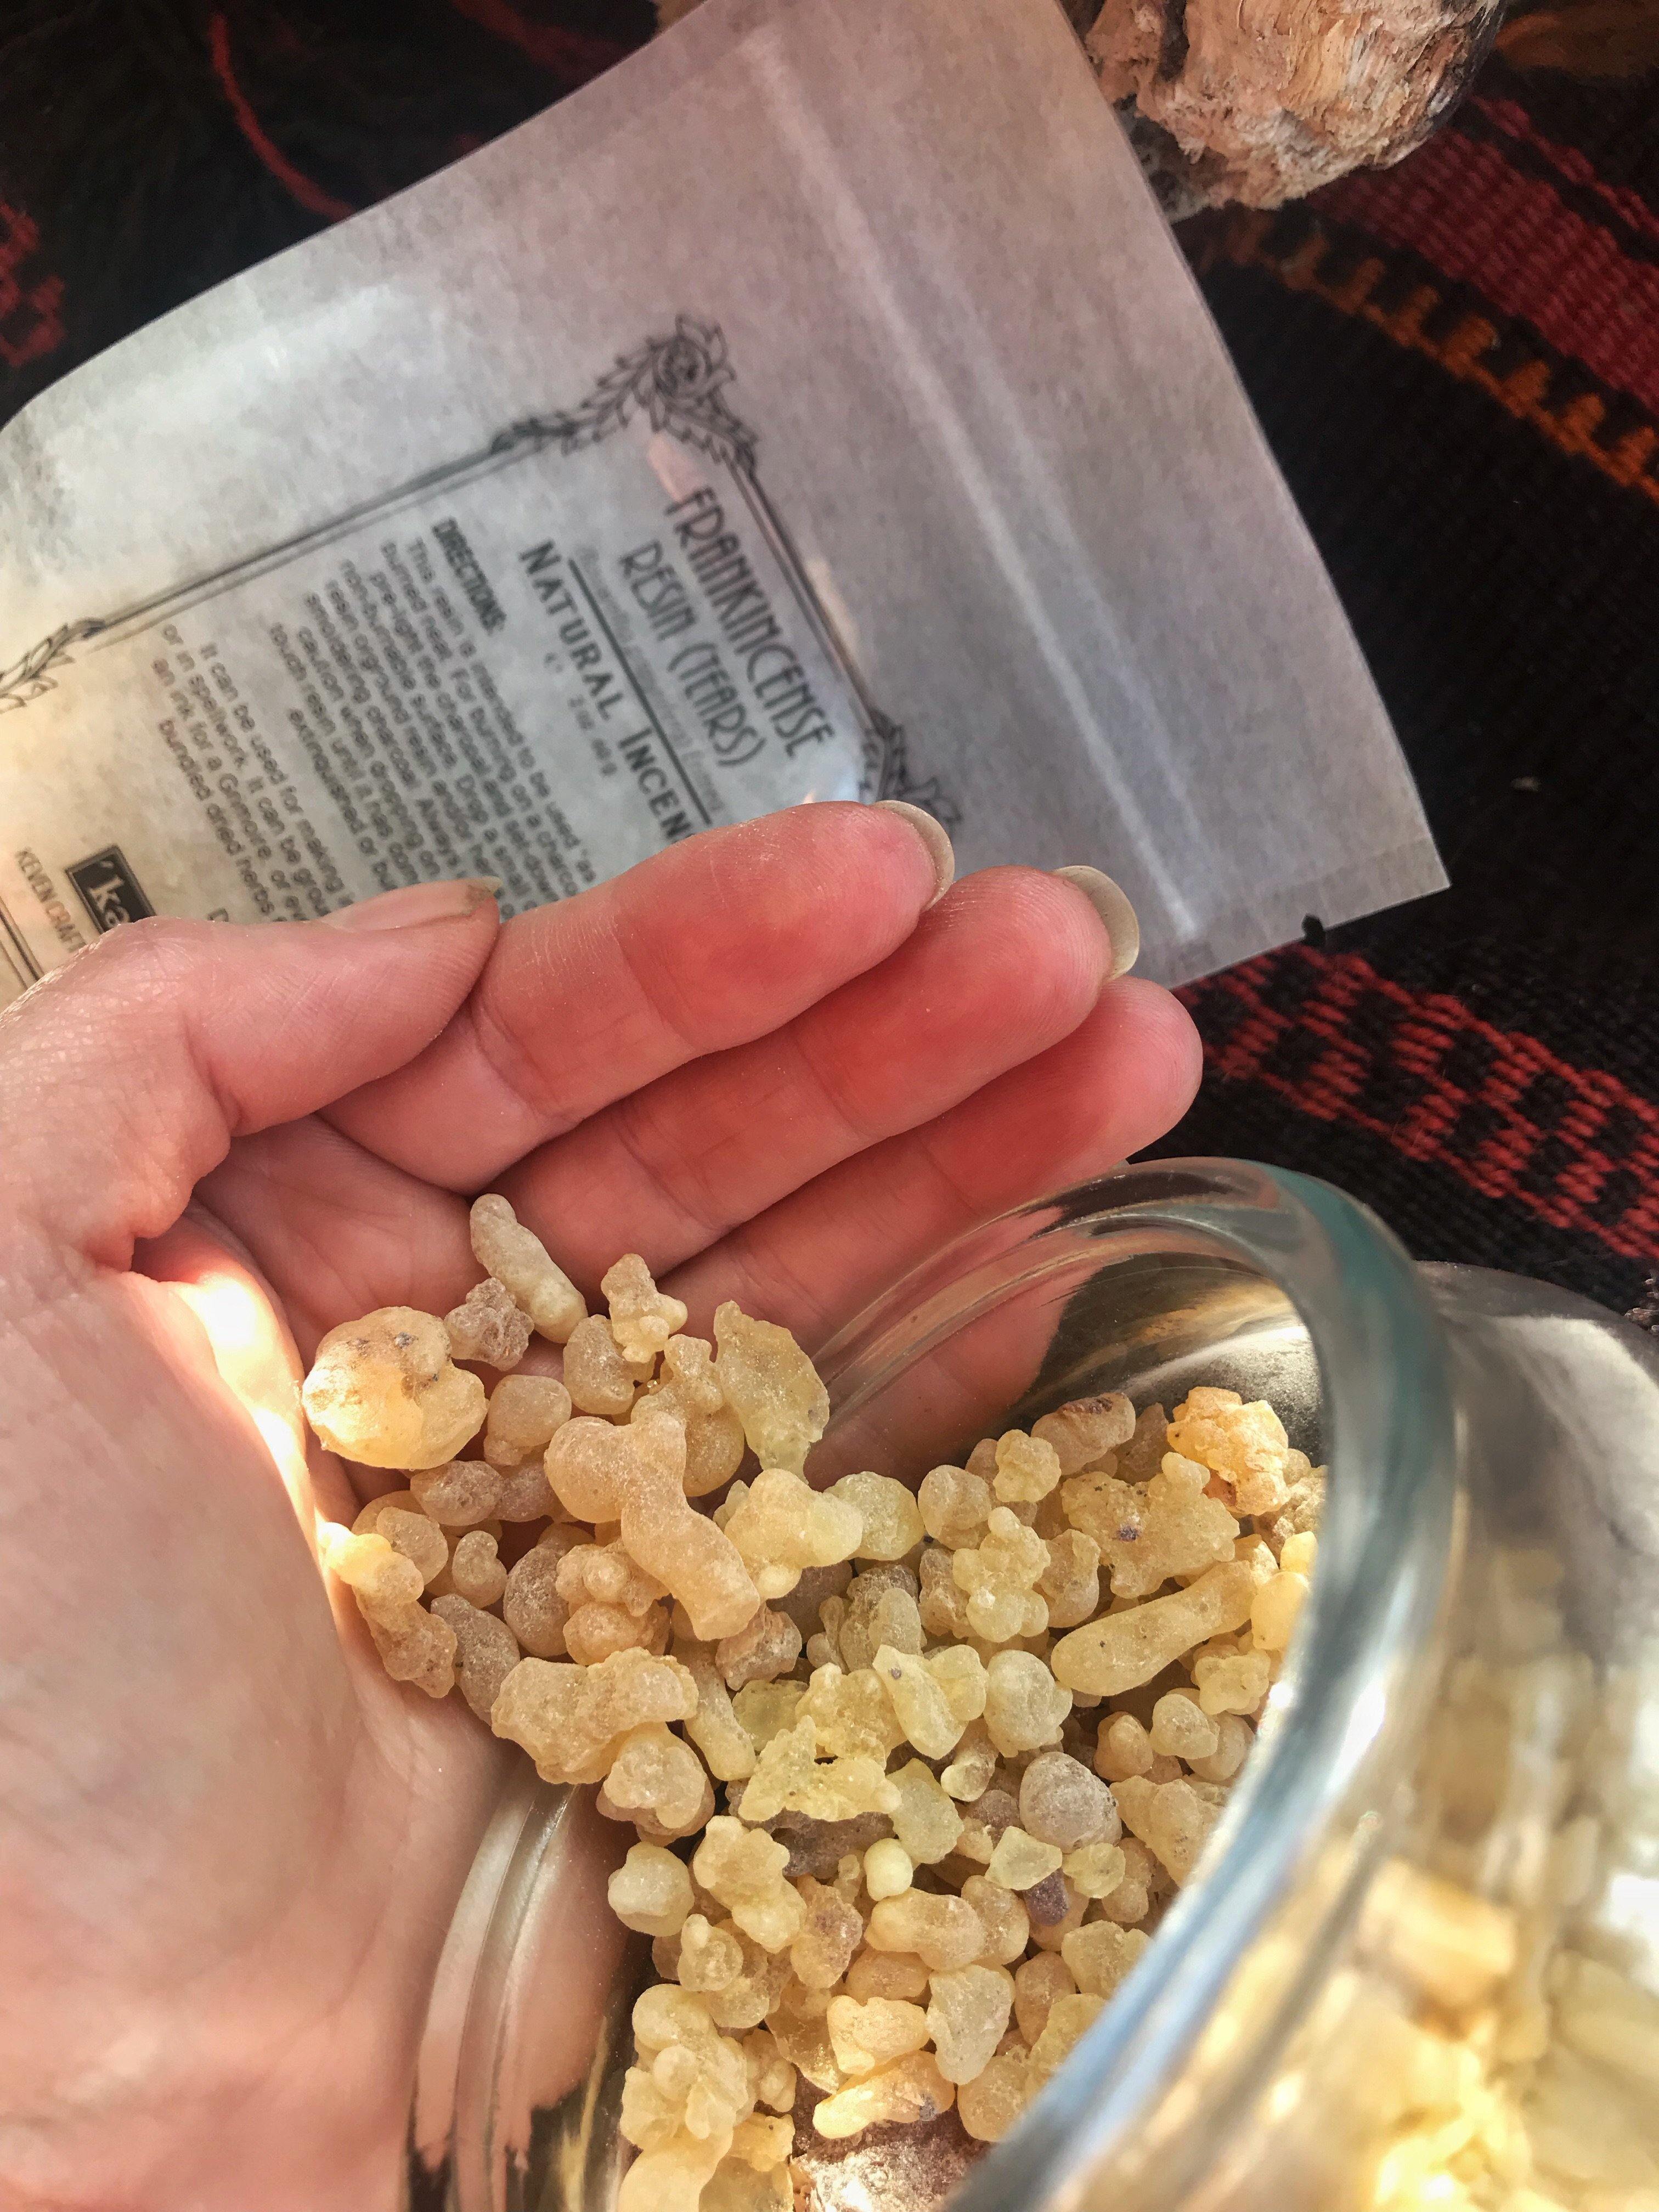 Frankincense (Premium Ethiopian Tears) - For Incense, Spells, and Potions - Keven Craft Rituals